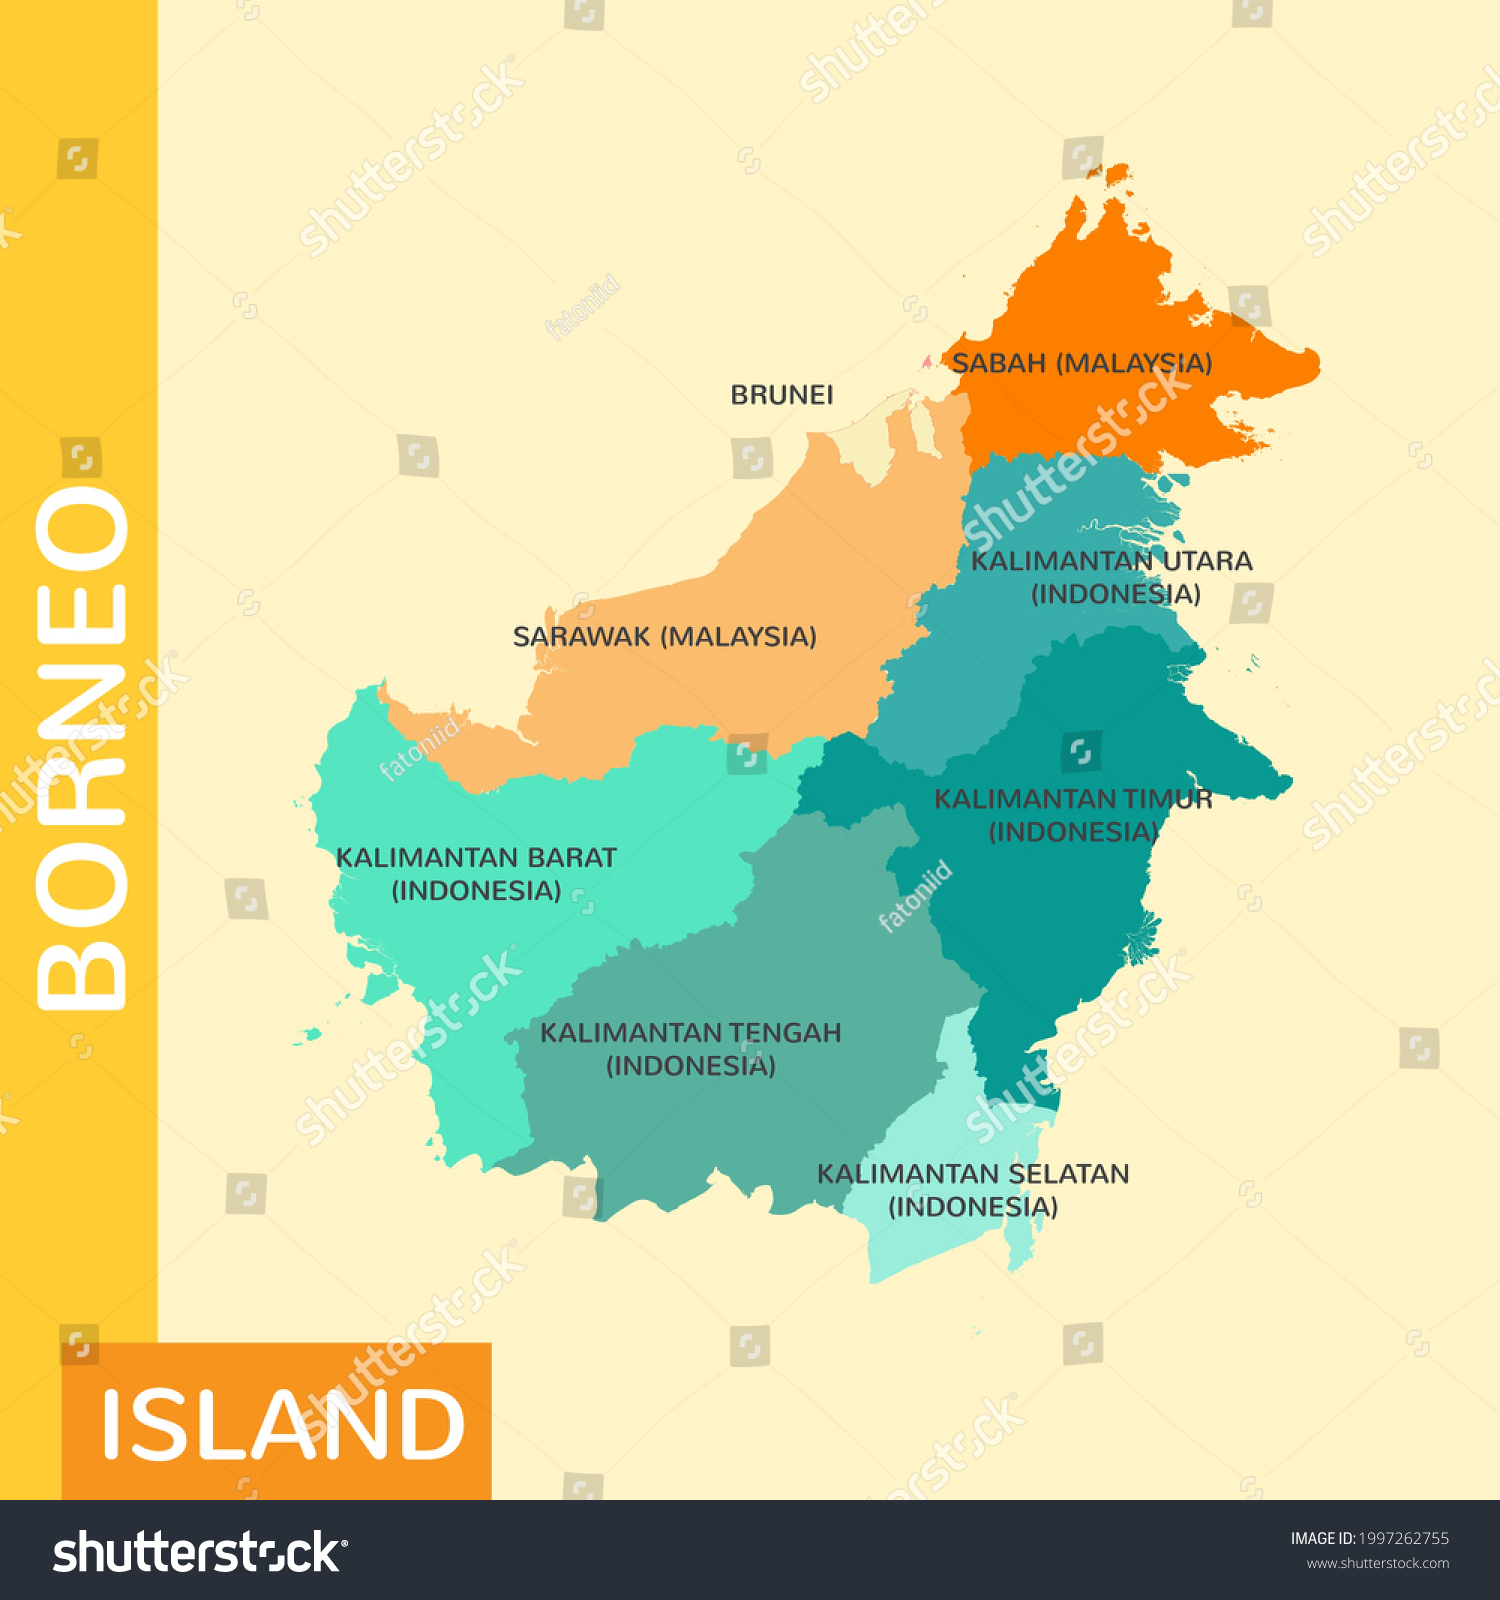 Color map of the island of borneo and its administrative areas #1997262755